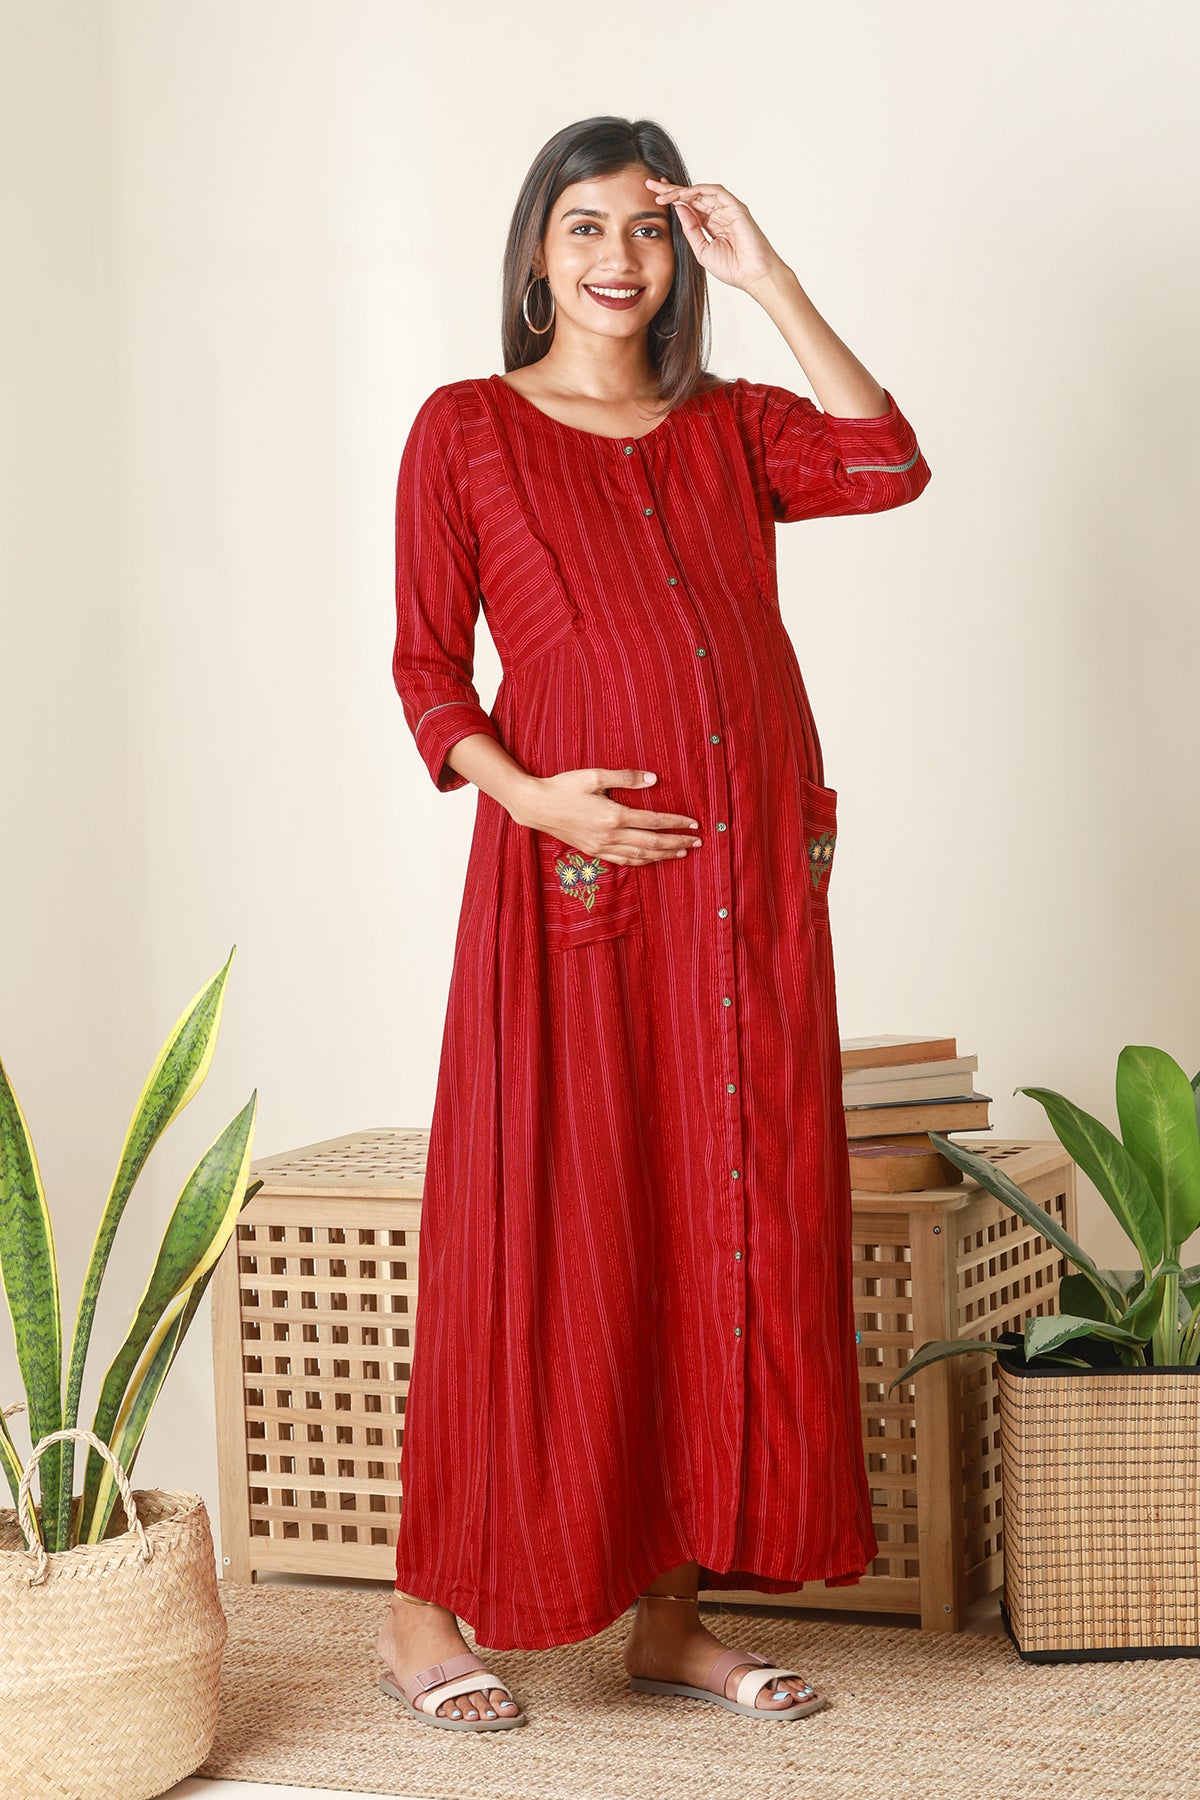 Textured Striped Maternity Dress with chic pockets - Maroon